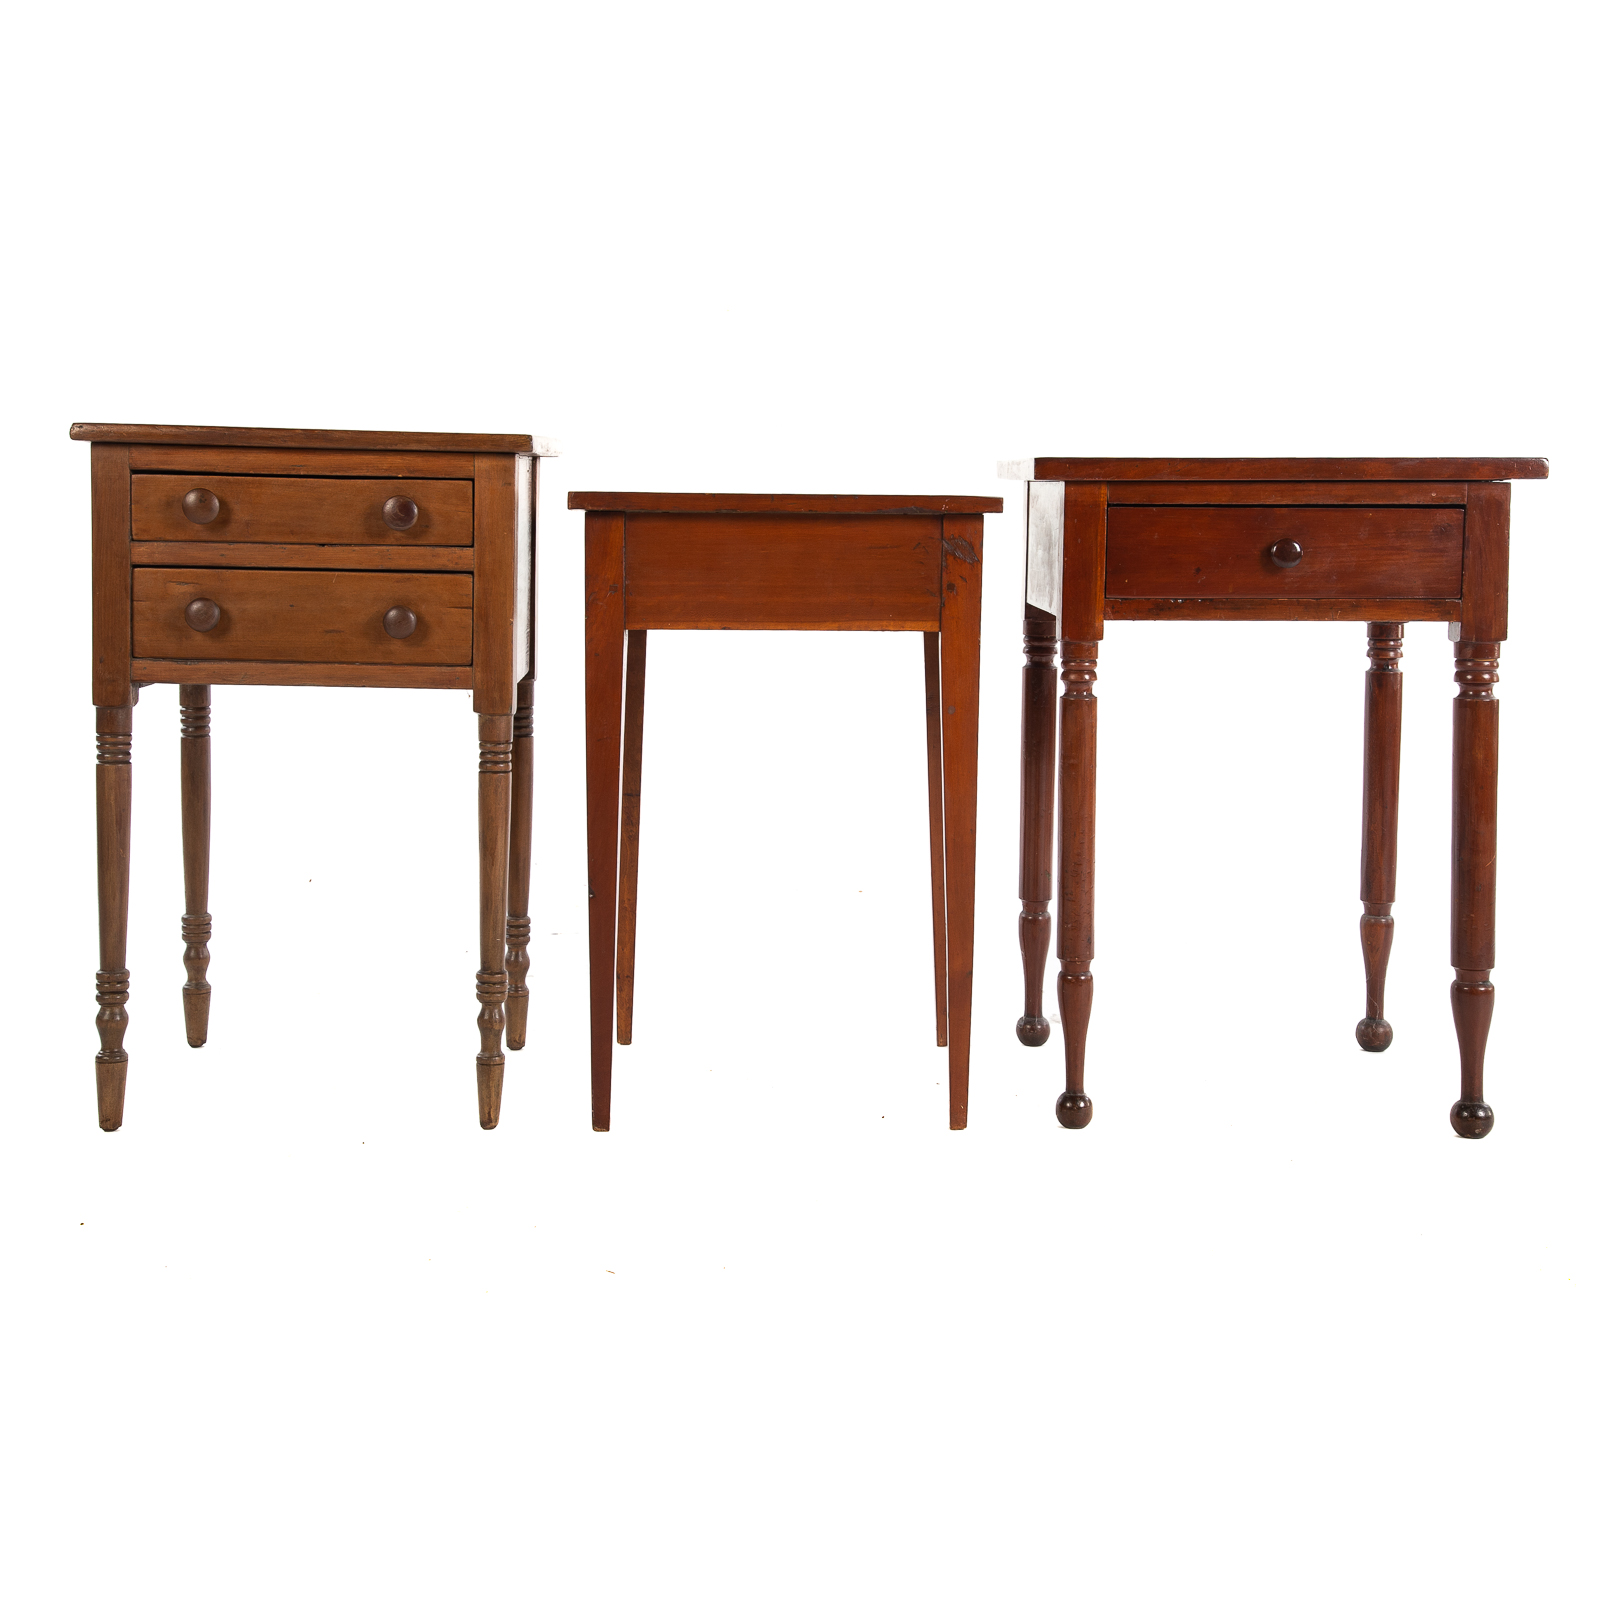 THREE AMERICAN COUNTRY WORK TABLES 29dafb